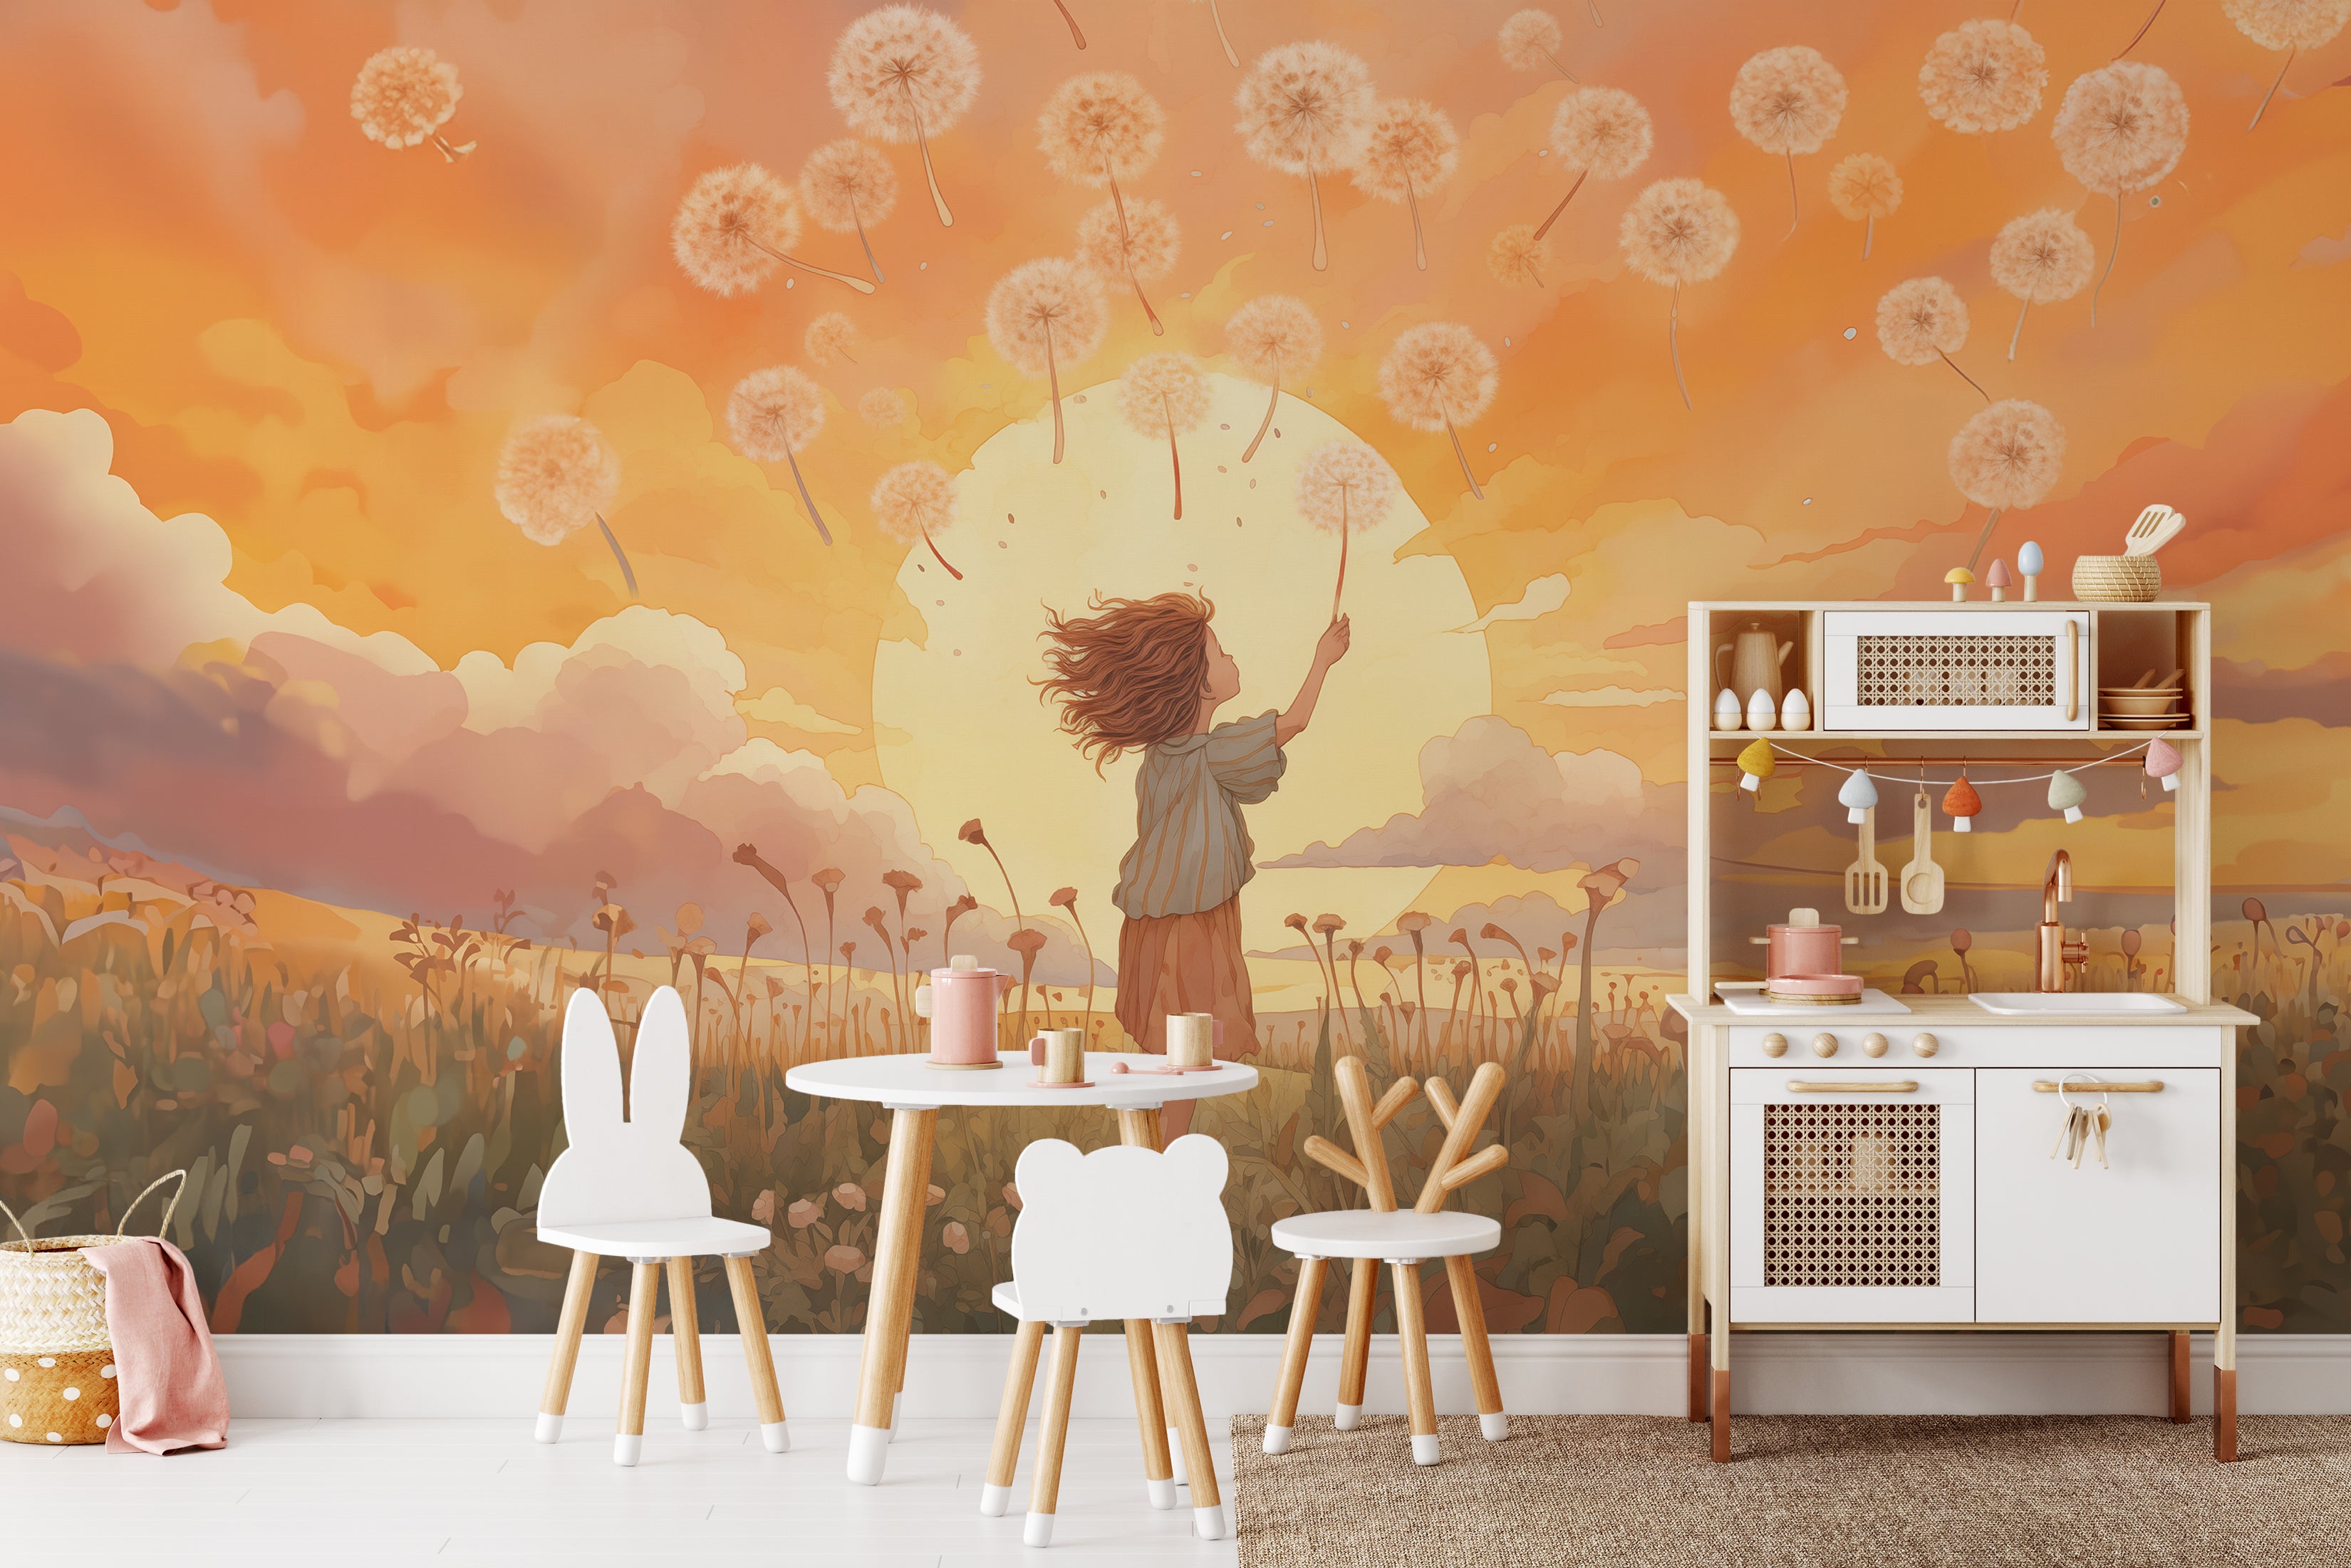 "Nursery room wall adorned with 'Make a Wish Mural' depicting a playful scene of a girl and floating dandelions at dusk."